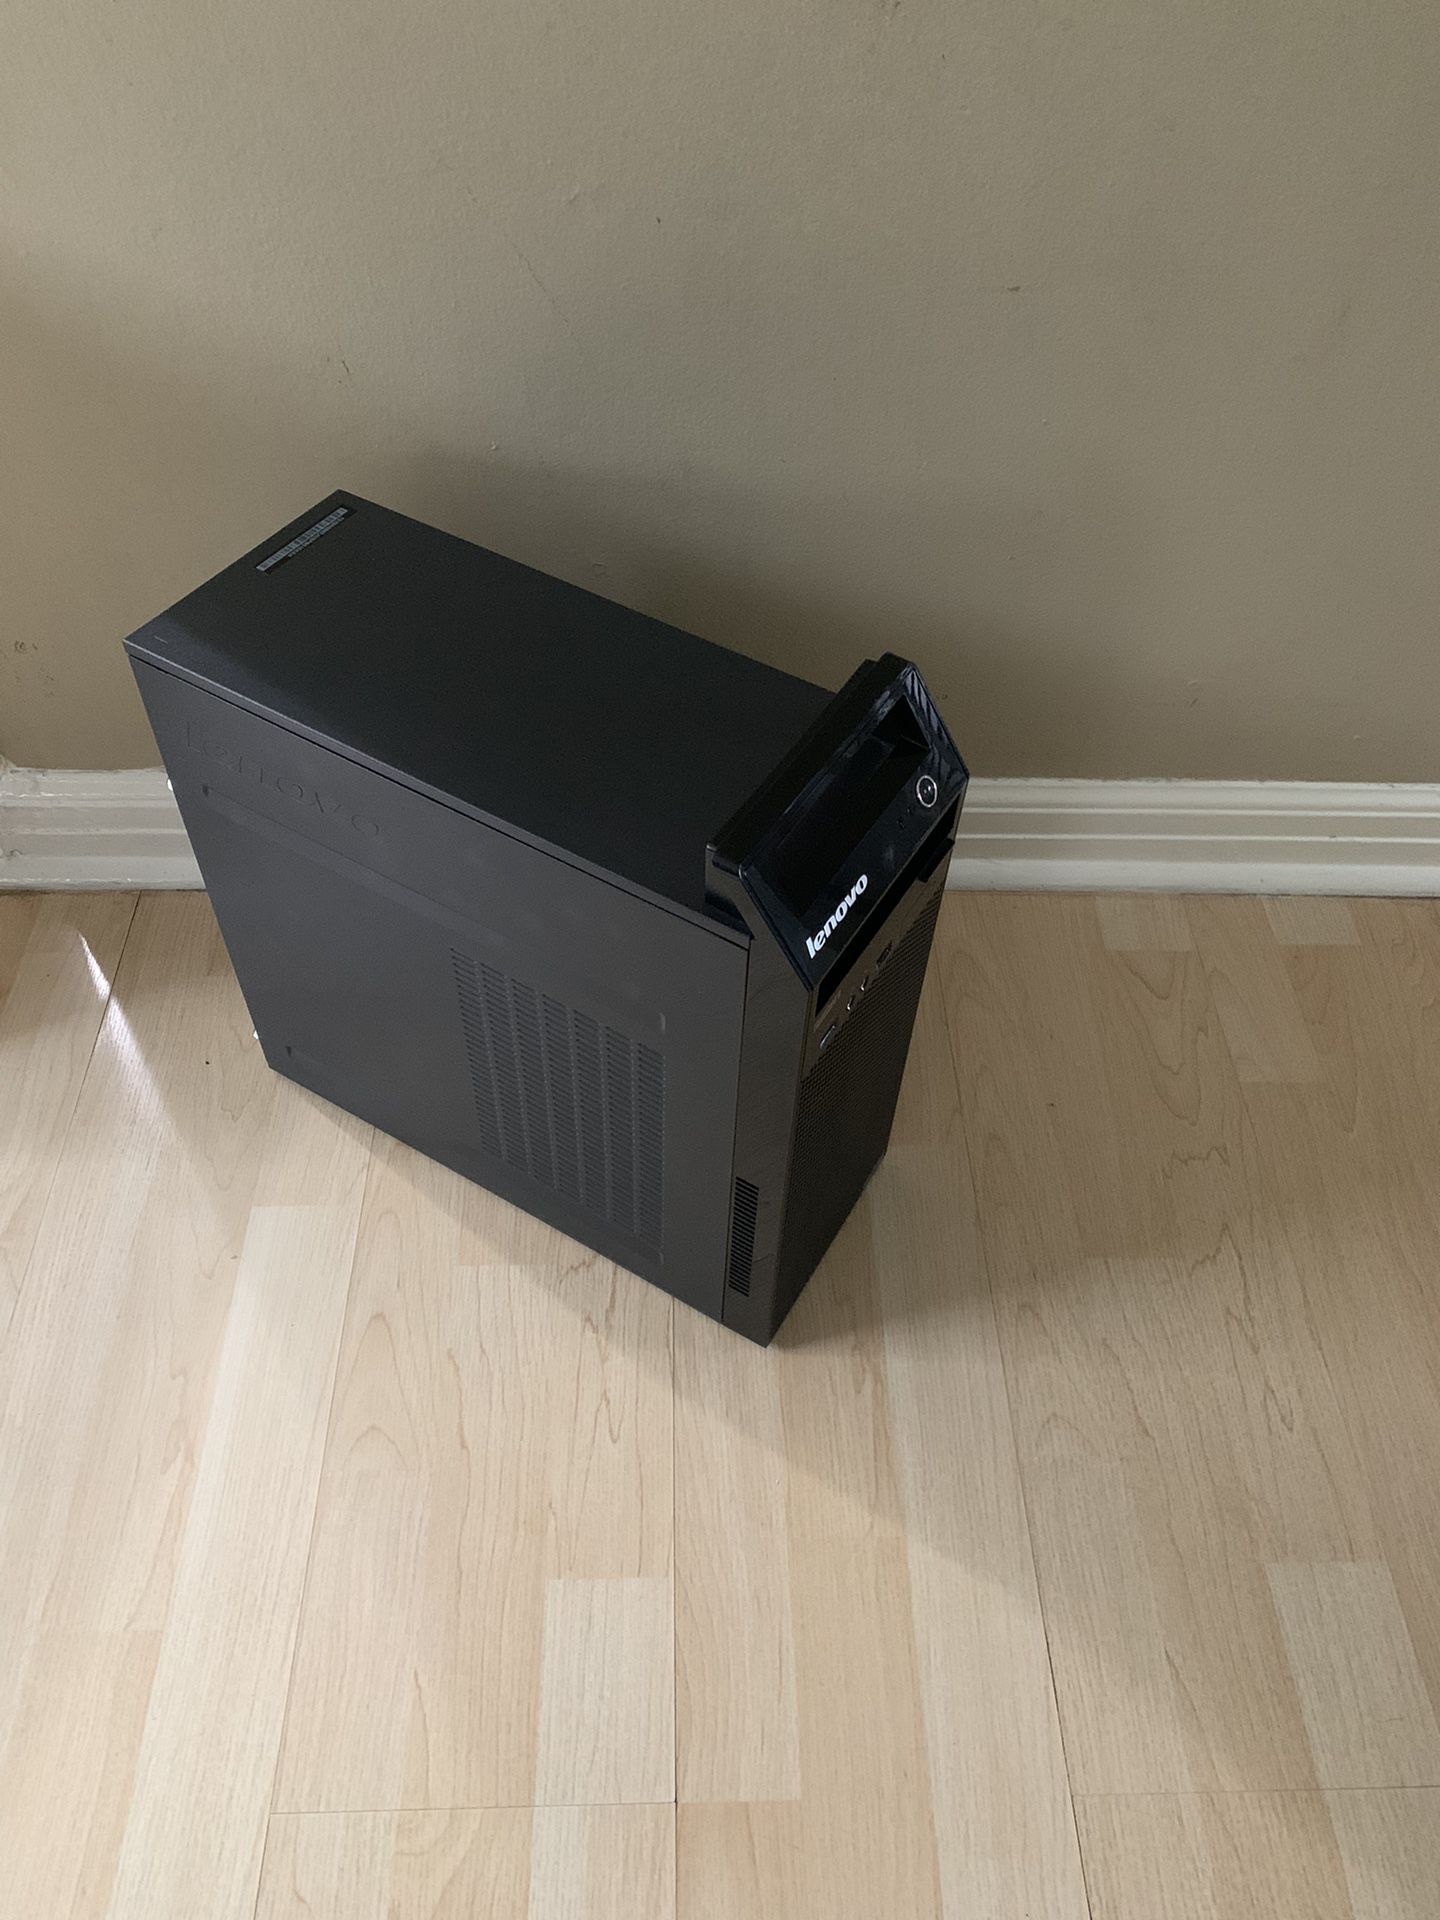 Computer Case For Sale